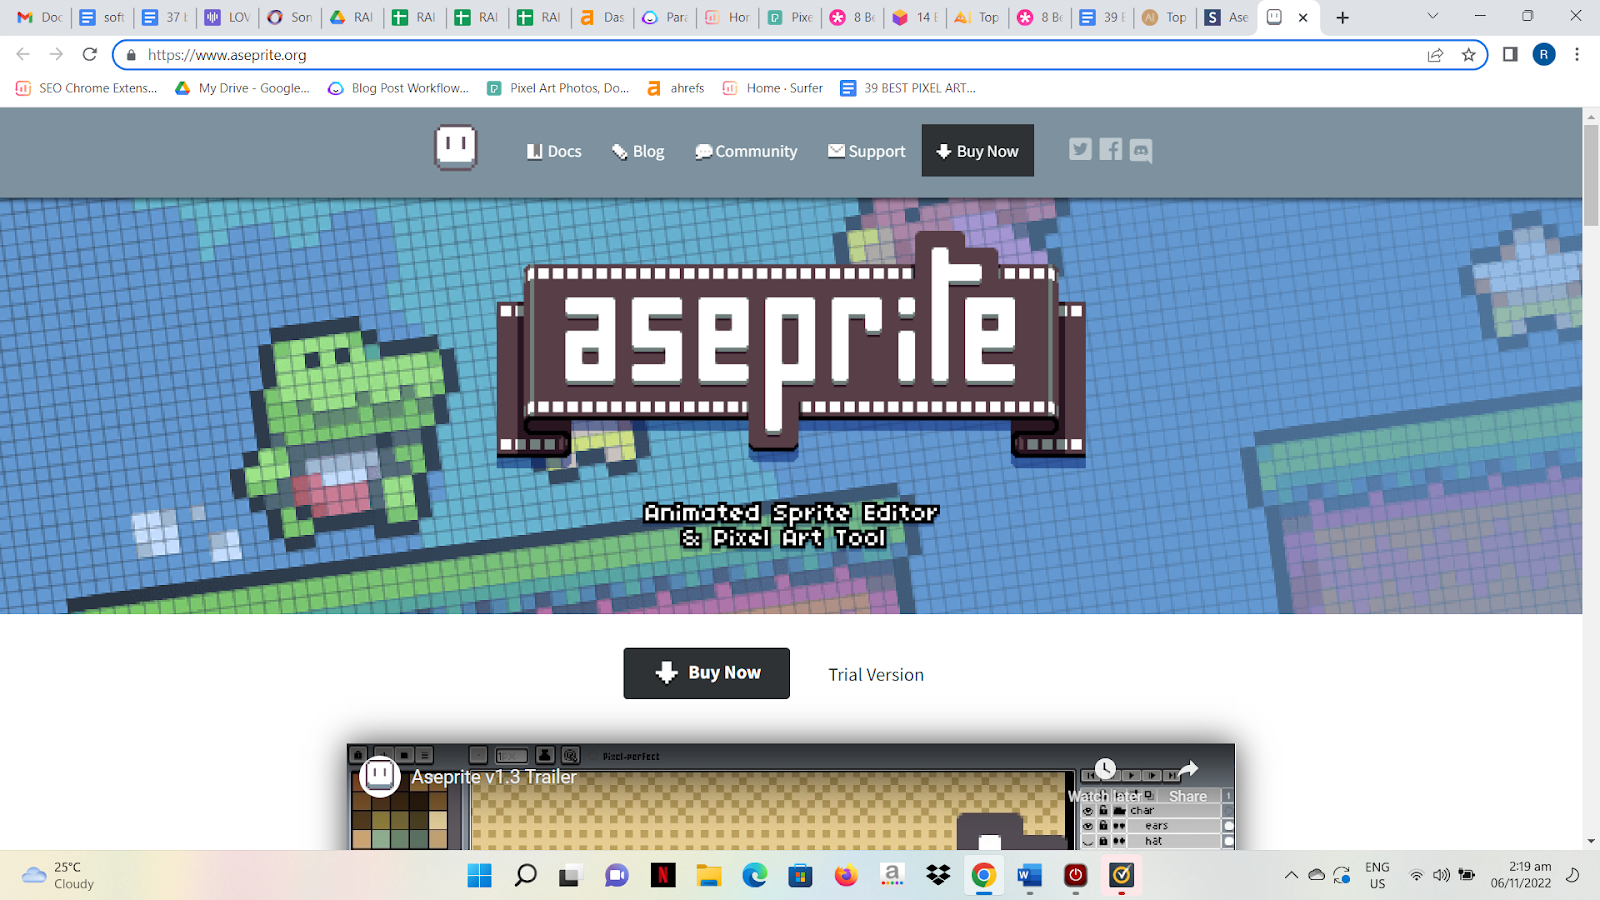 Aseprite is an image editor that allows users to create and resize pixel art.